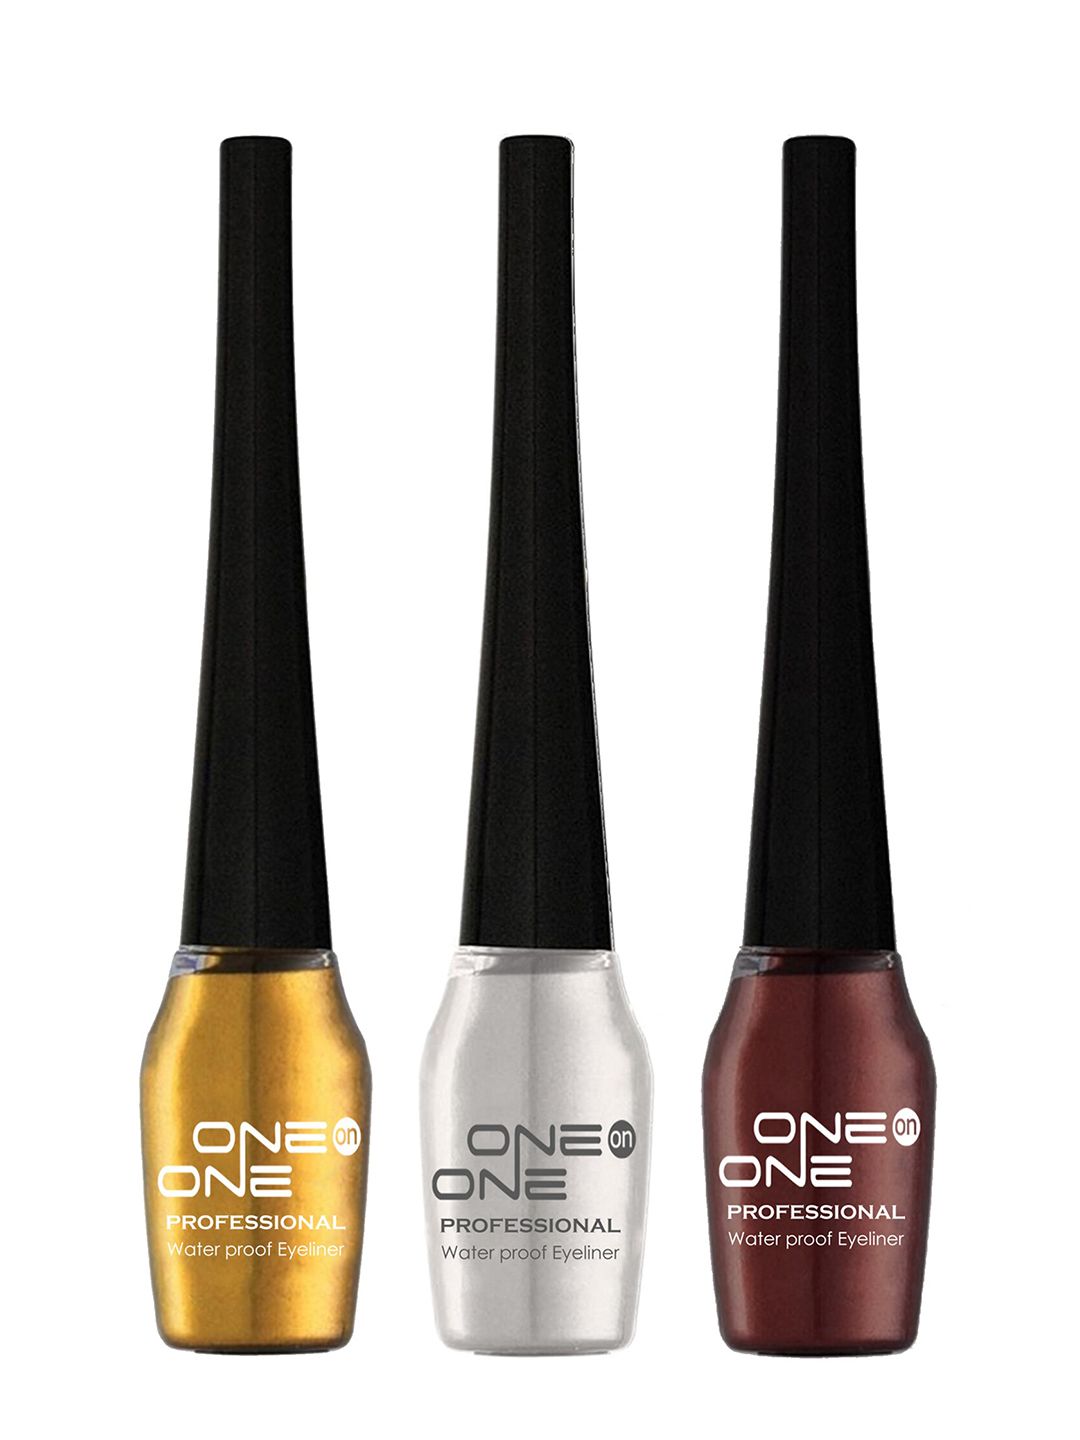 ONE on ONE Set of 3 Professional Waterproof Liquid Eyeliners Price in India